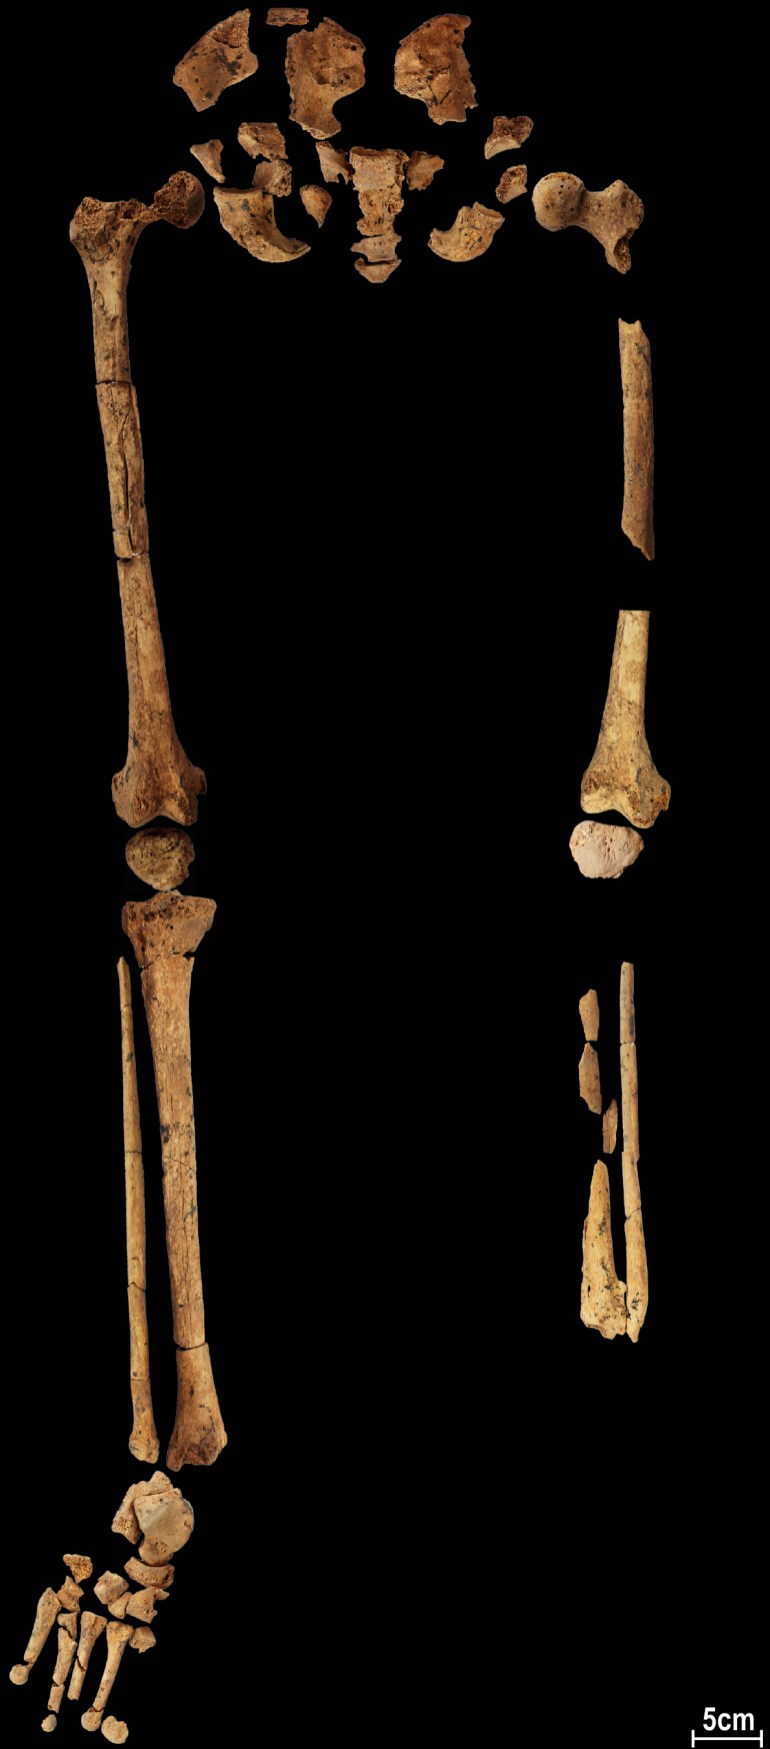 Borneo skeleton might present 31,000 yr previous amputation | Science and Expertise Information